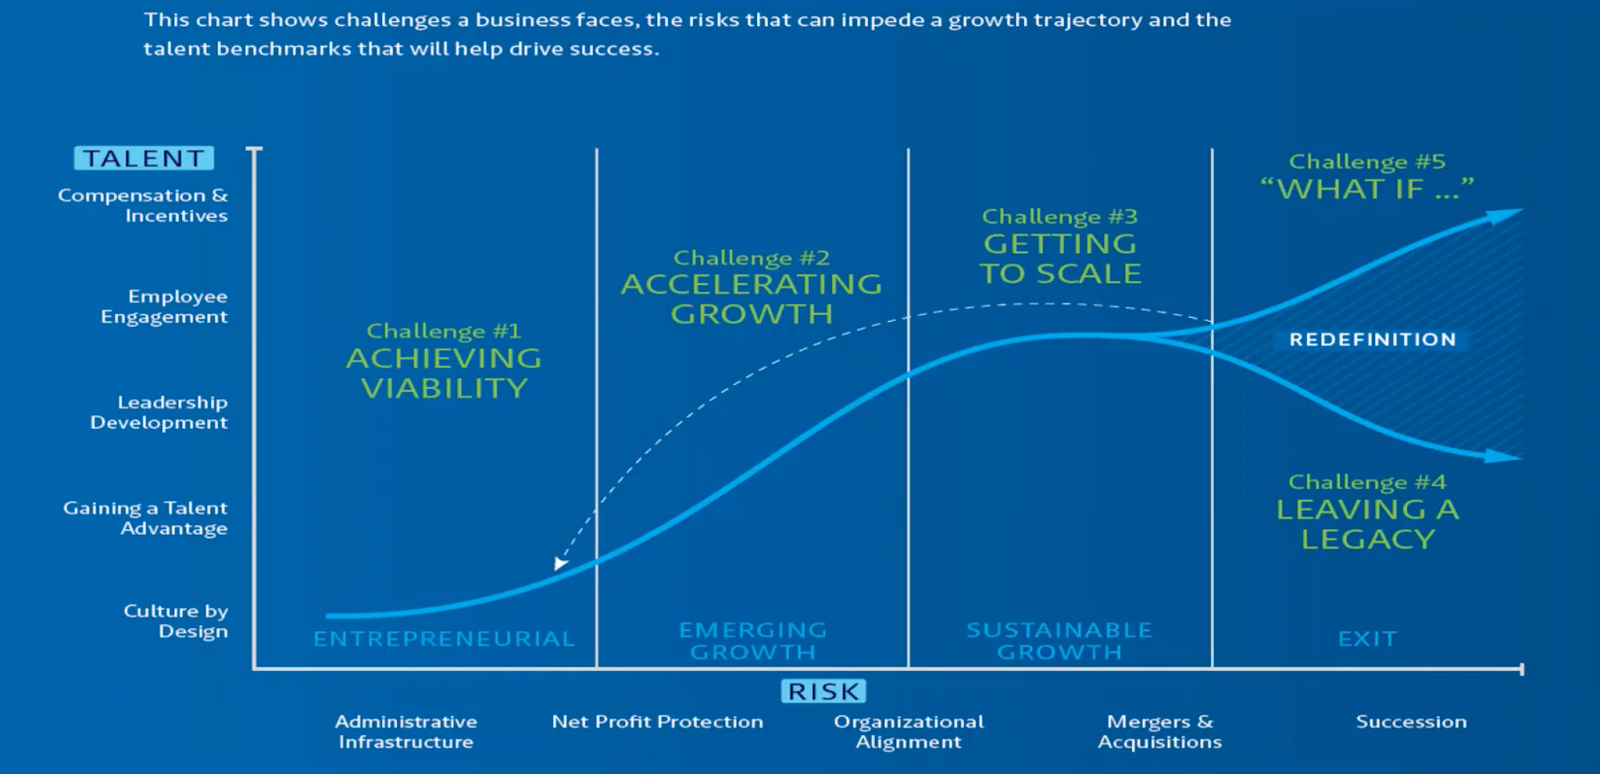 The relationship between talent and risk at different stages in a company’s life cycle.